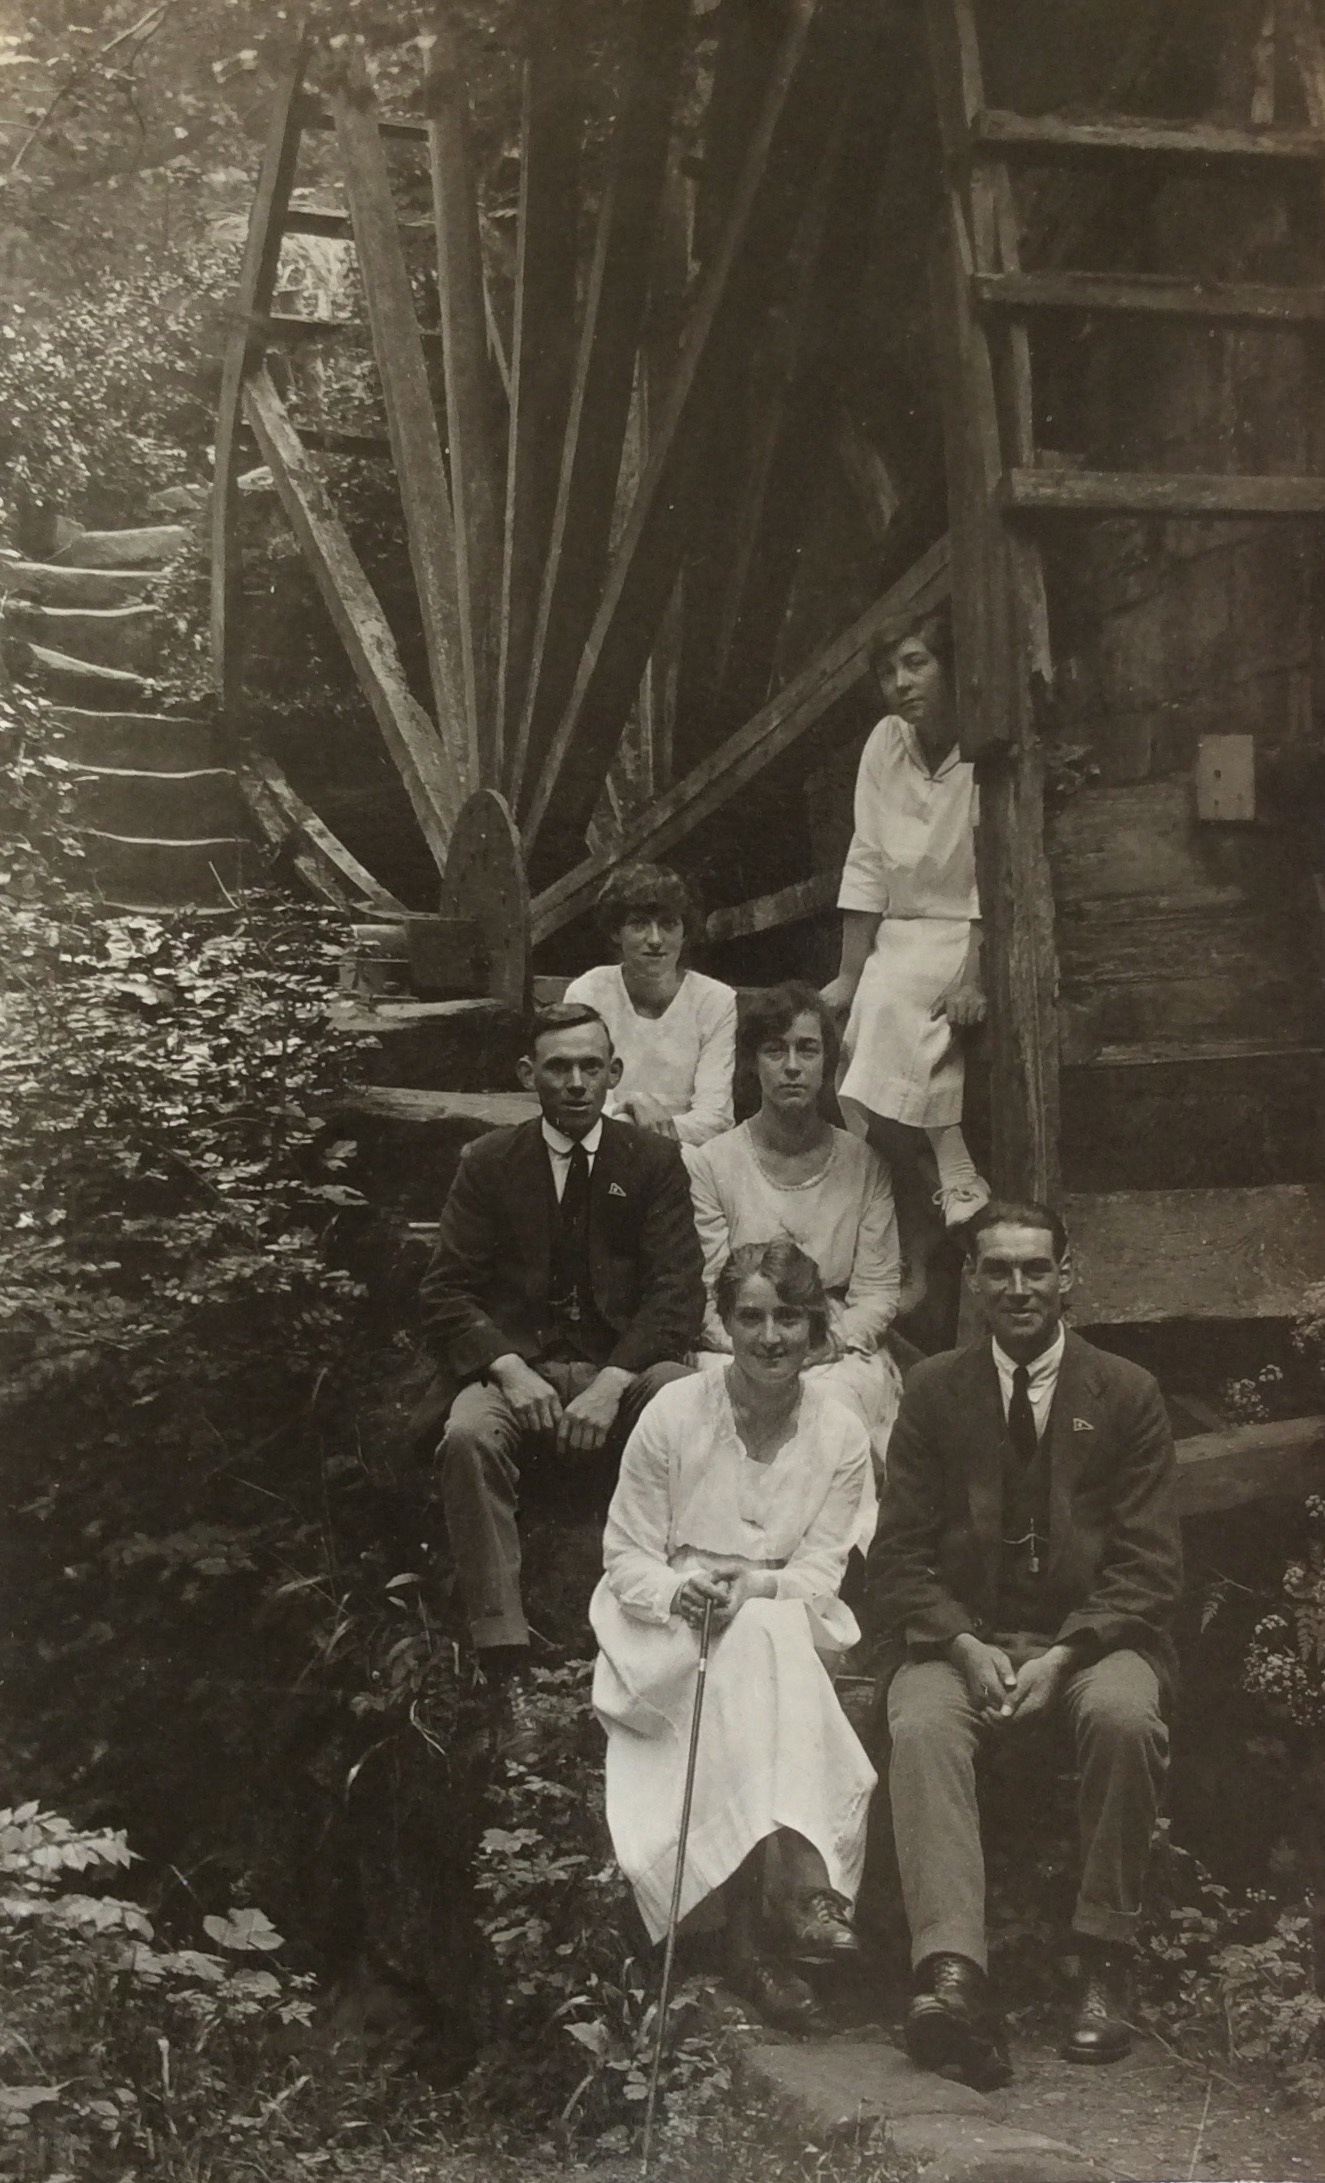 My maternal Grandfather Tom Simpson, (1899-1955), at Rigg Mill near Whitby, England.
Pictured on front row with a group of friends circa 1920.